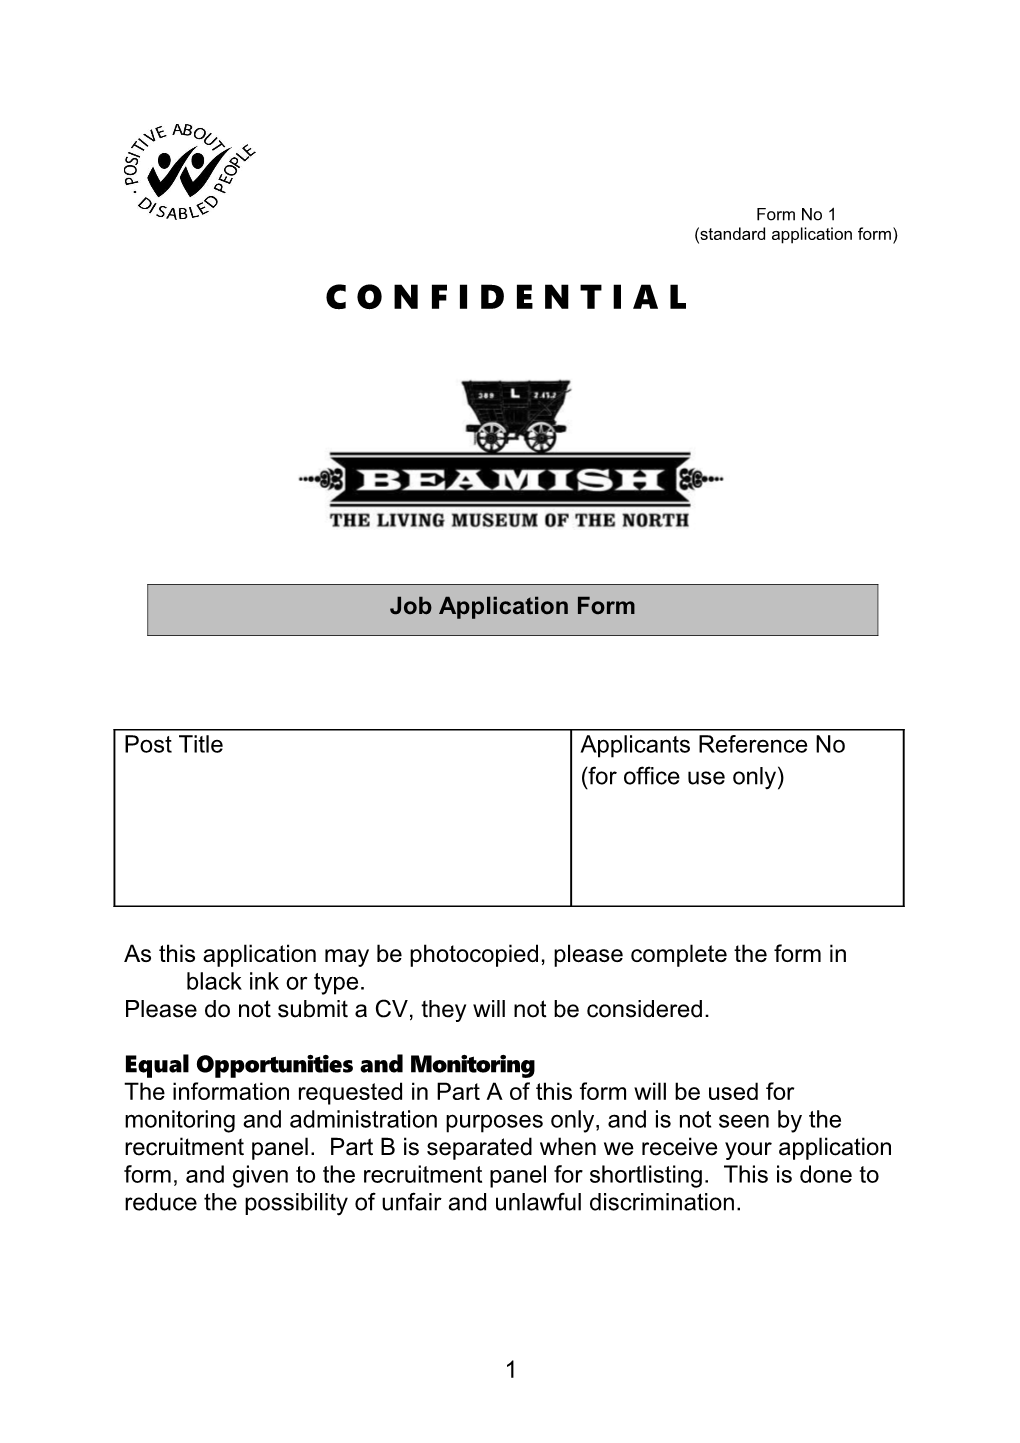 As This Application May Be Photocopied, Please Complete the Form in Black Ink Or Type